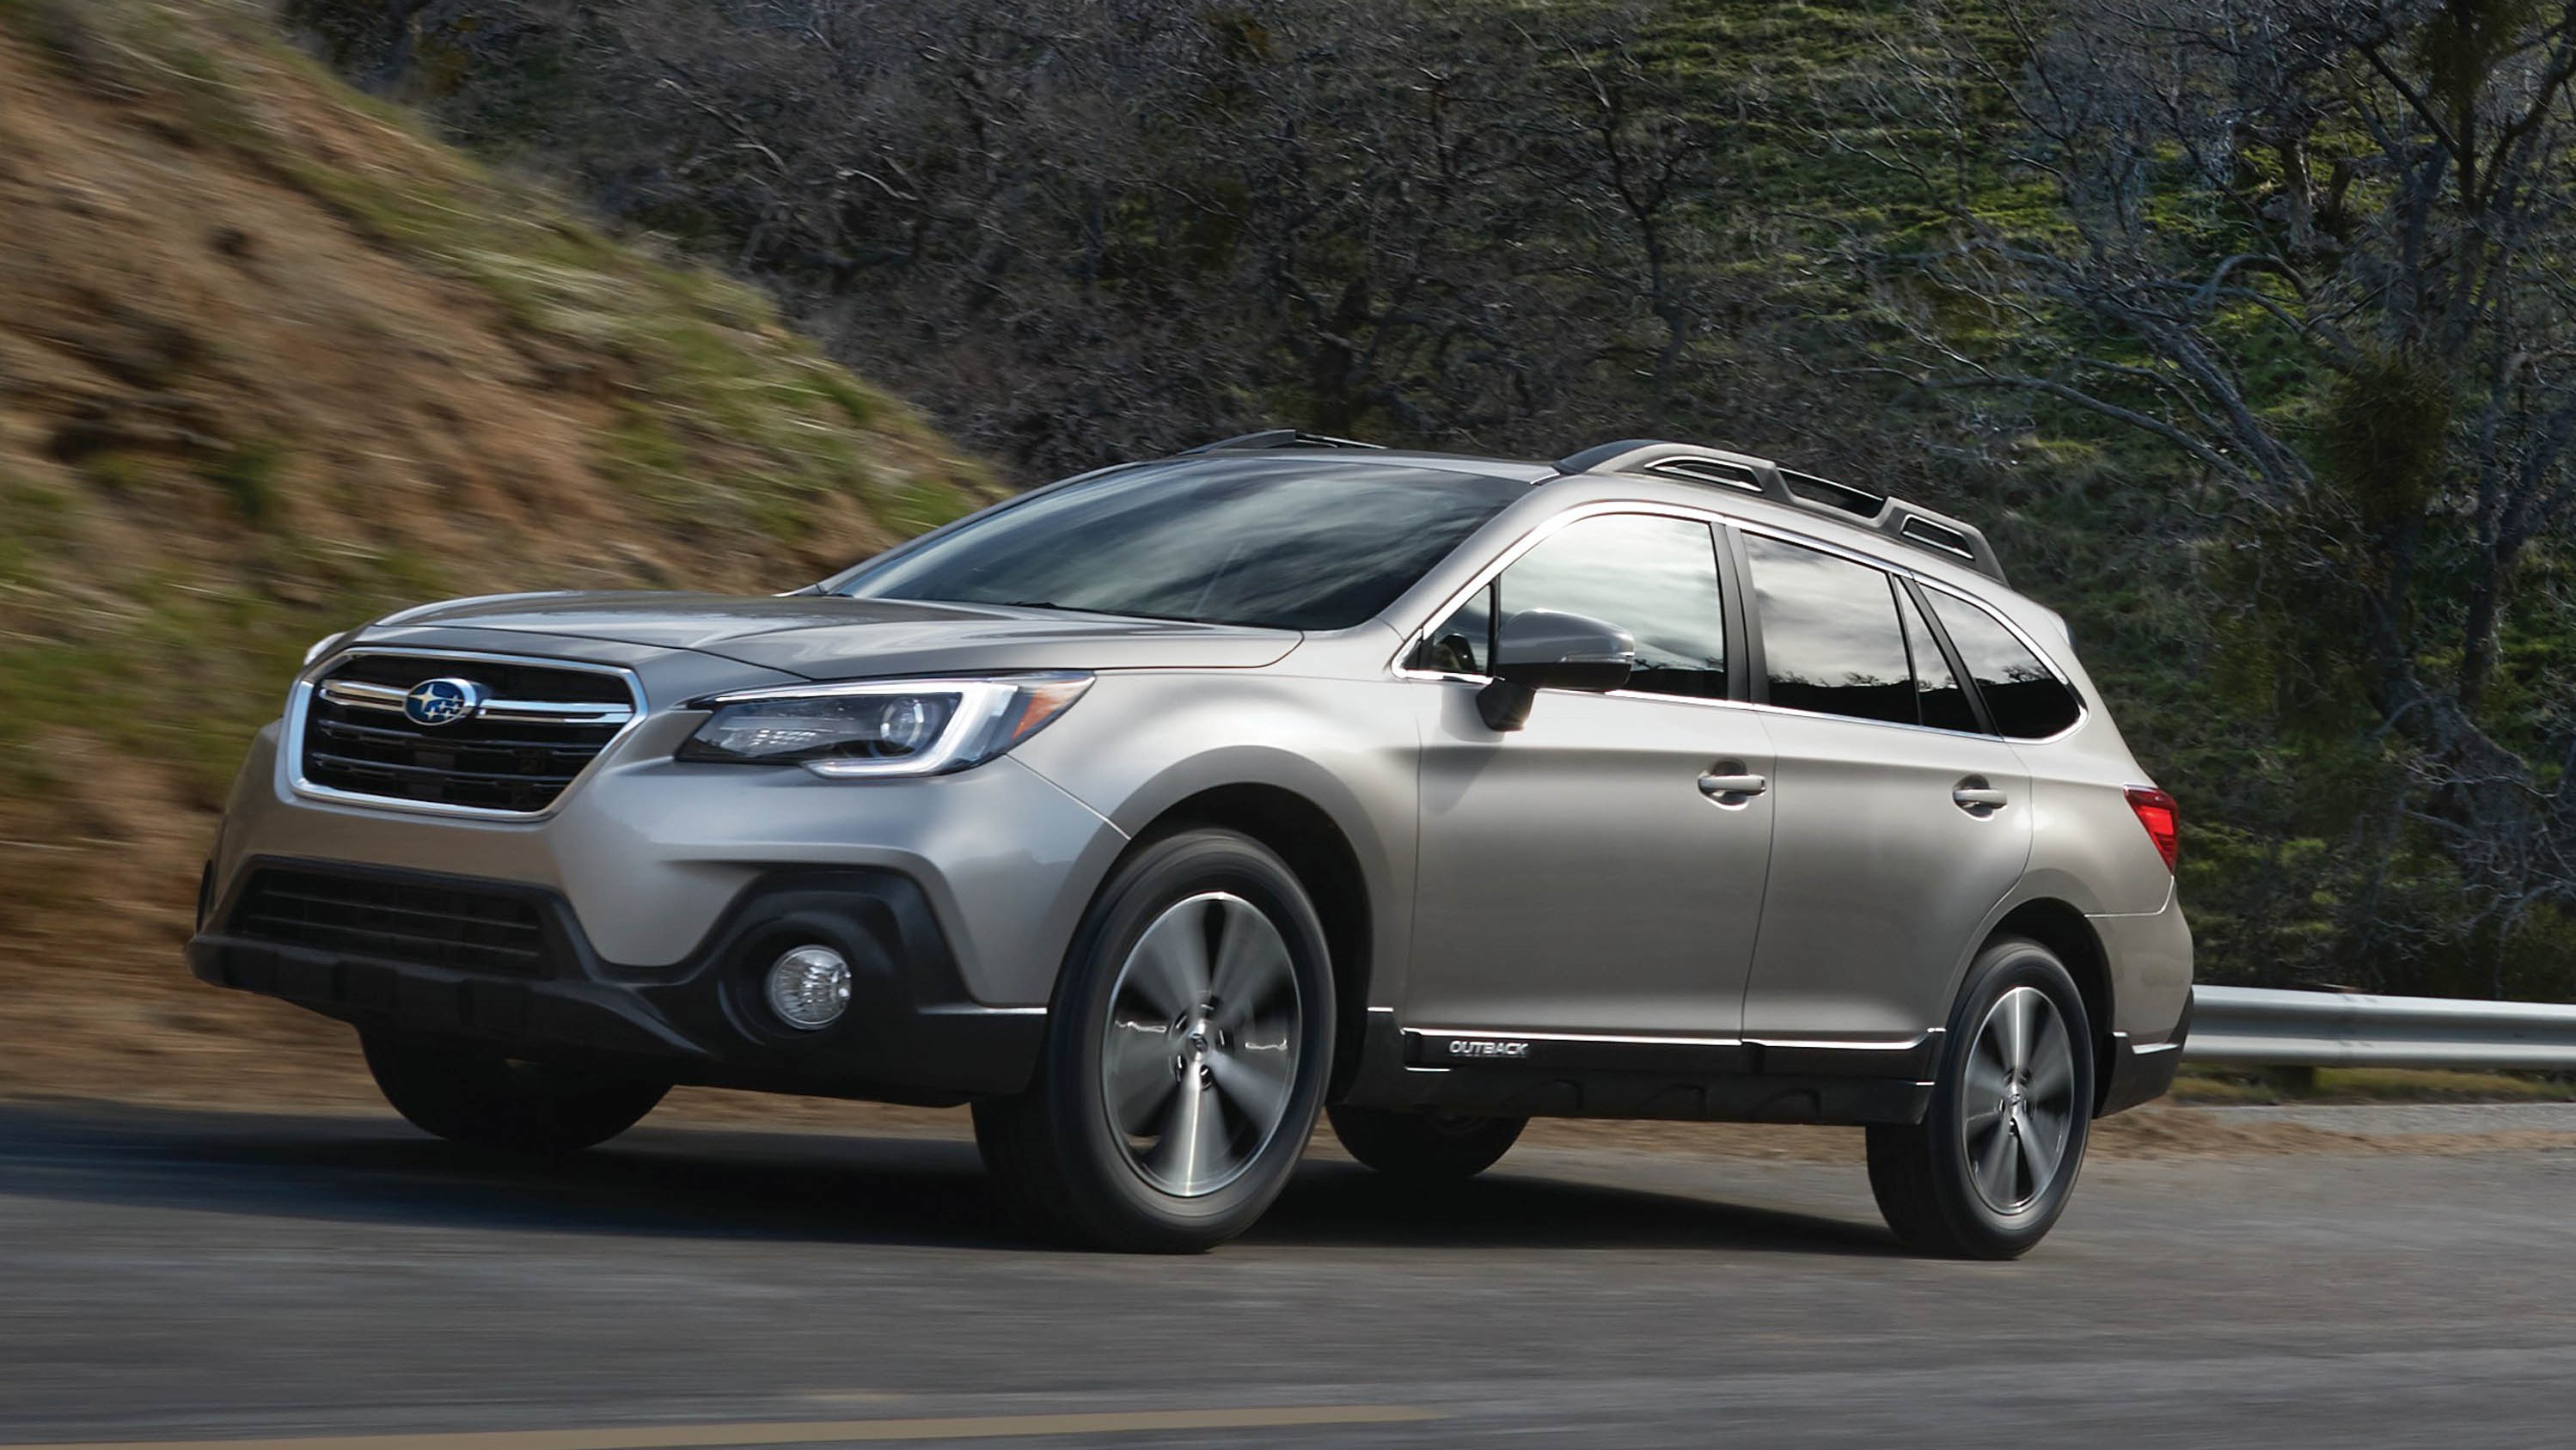 Be Careful…Your 2018 Subaru Outback Could Run Out of Gas!